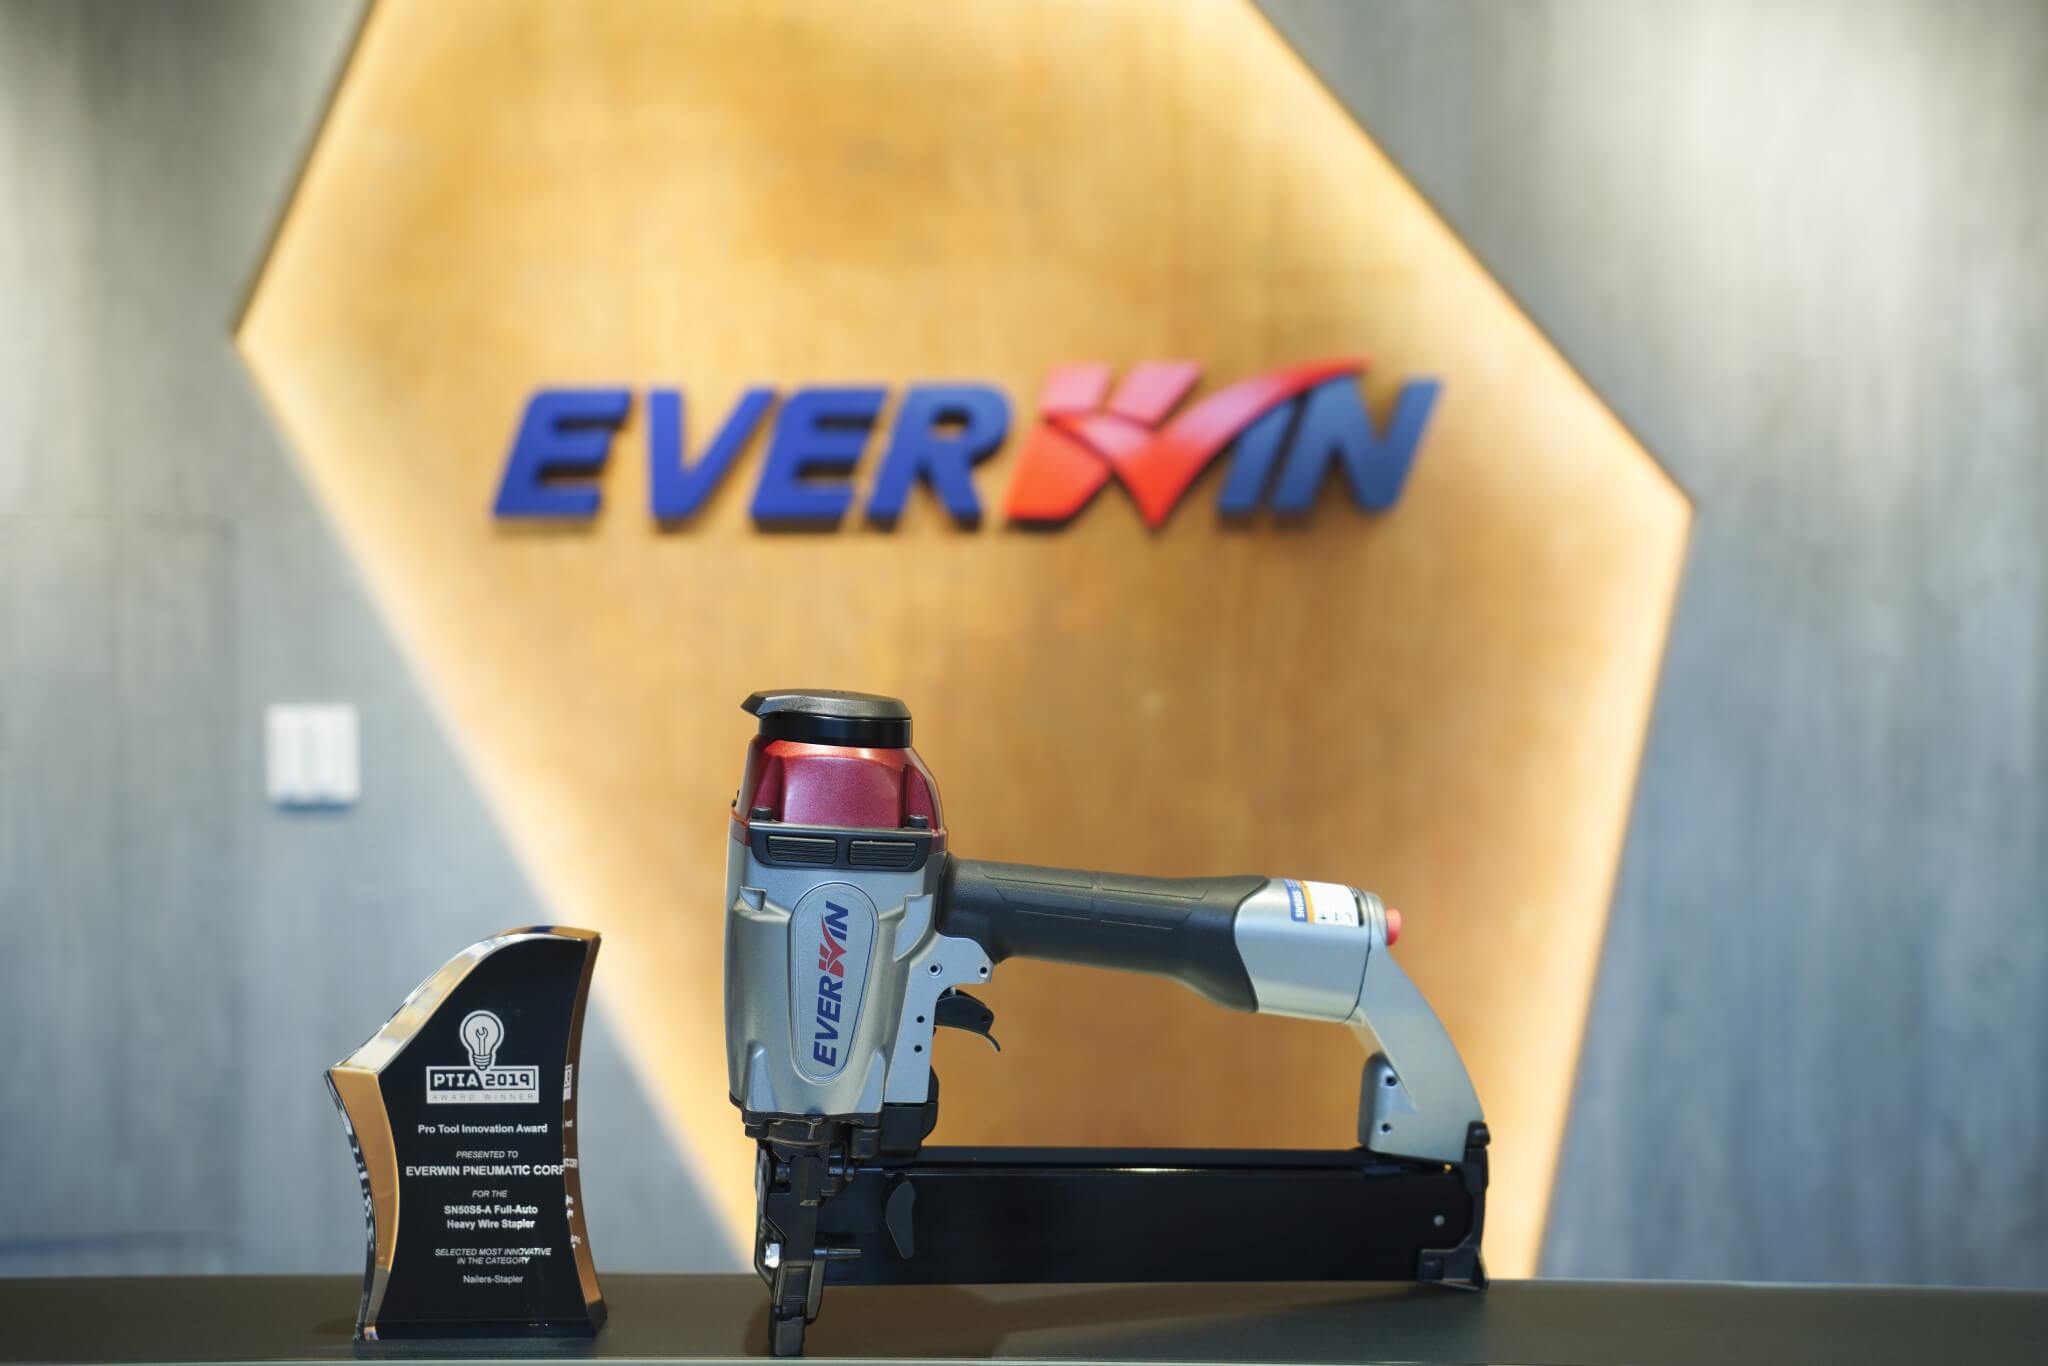 The SN50S5-A Full-Automatic Stapler wins the 2019 Pro Tool Innovation Awards